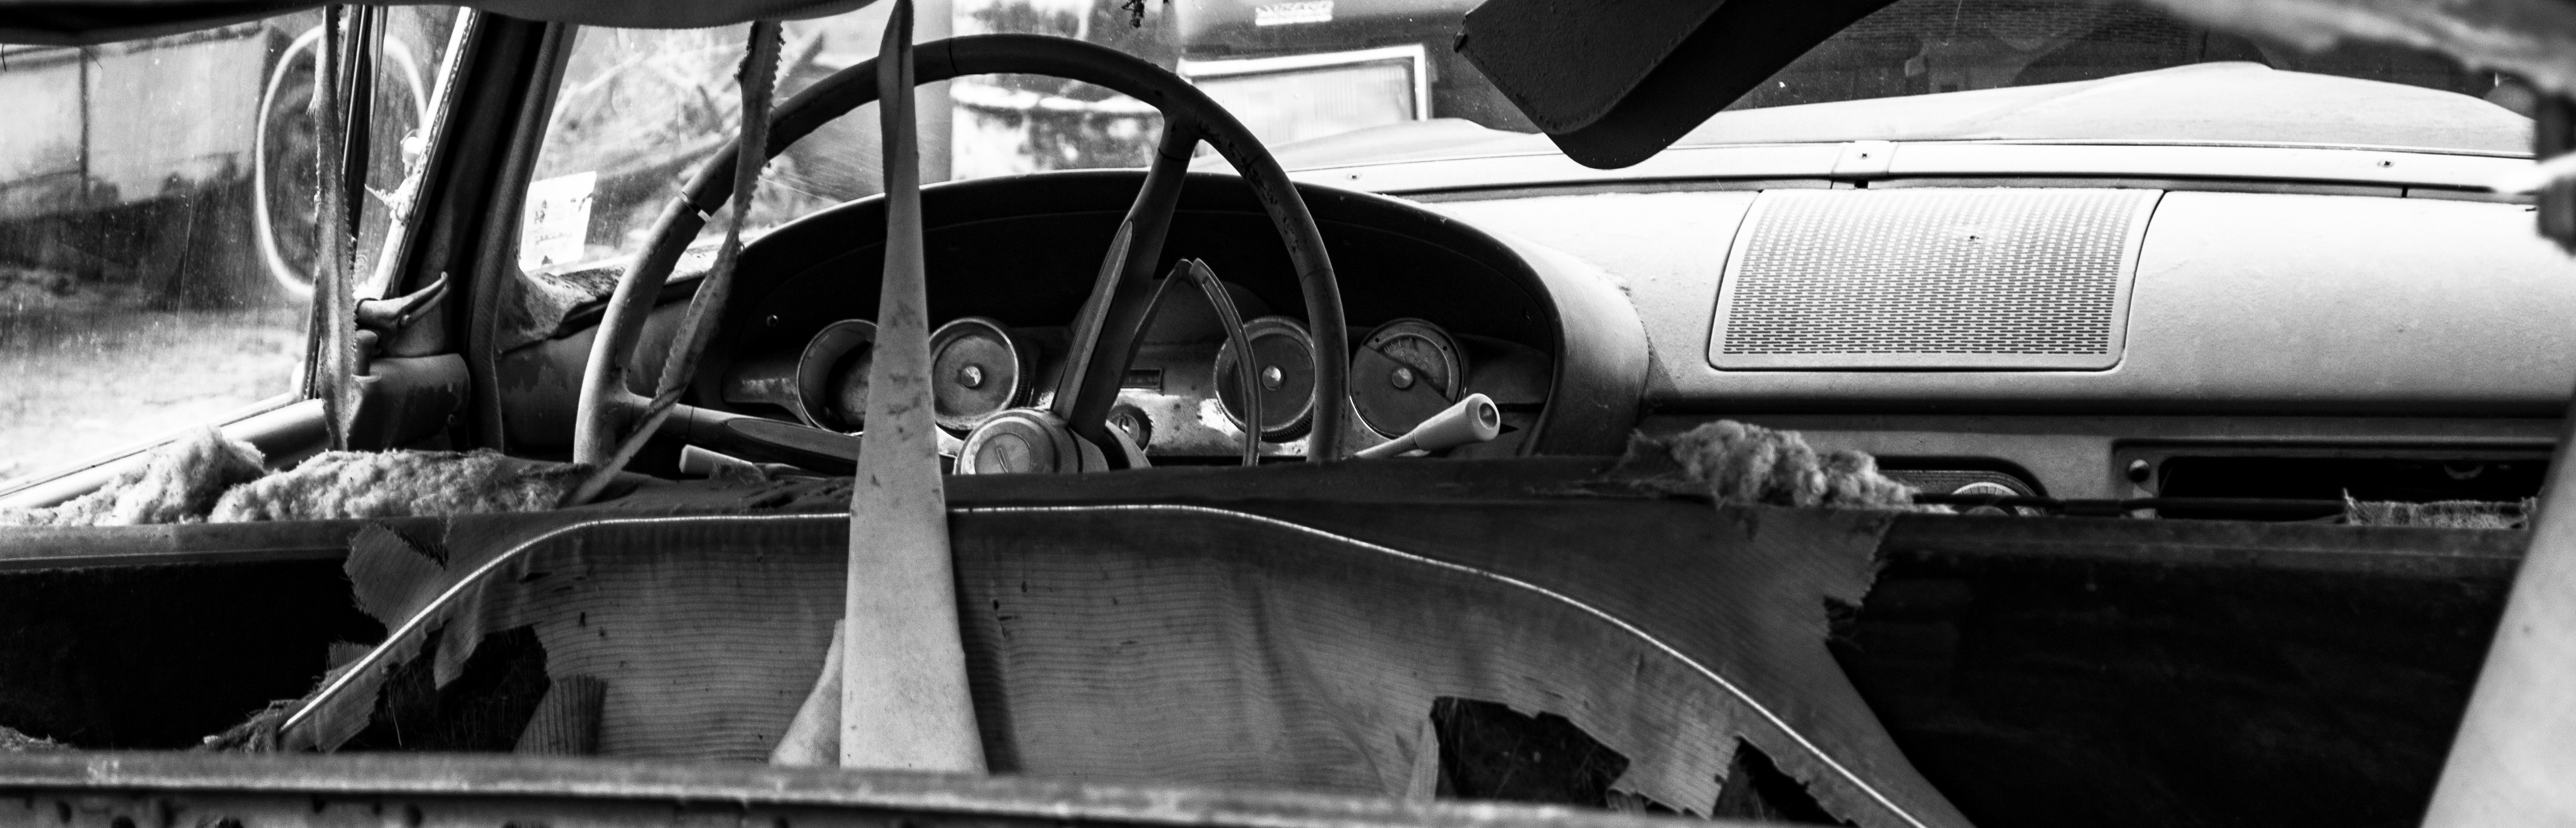 Black and white photo of an abandoned car dashboard, Black and white photo of an abandoned car dashboard